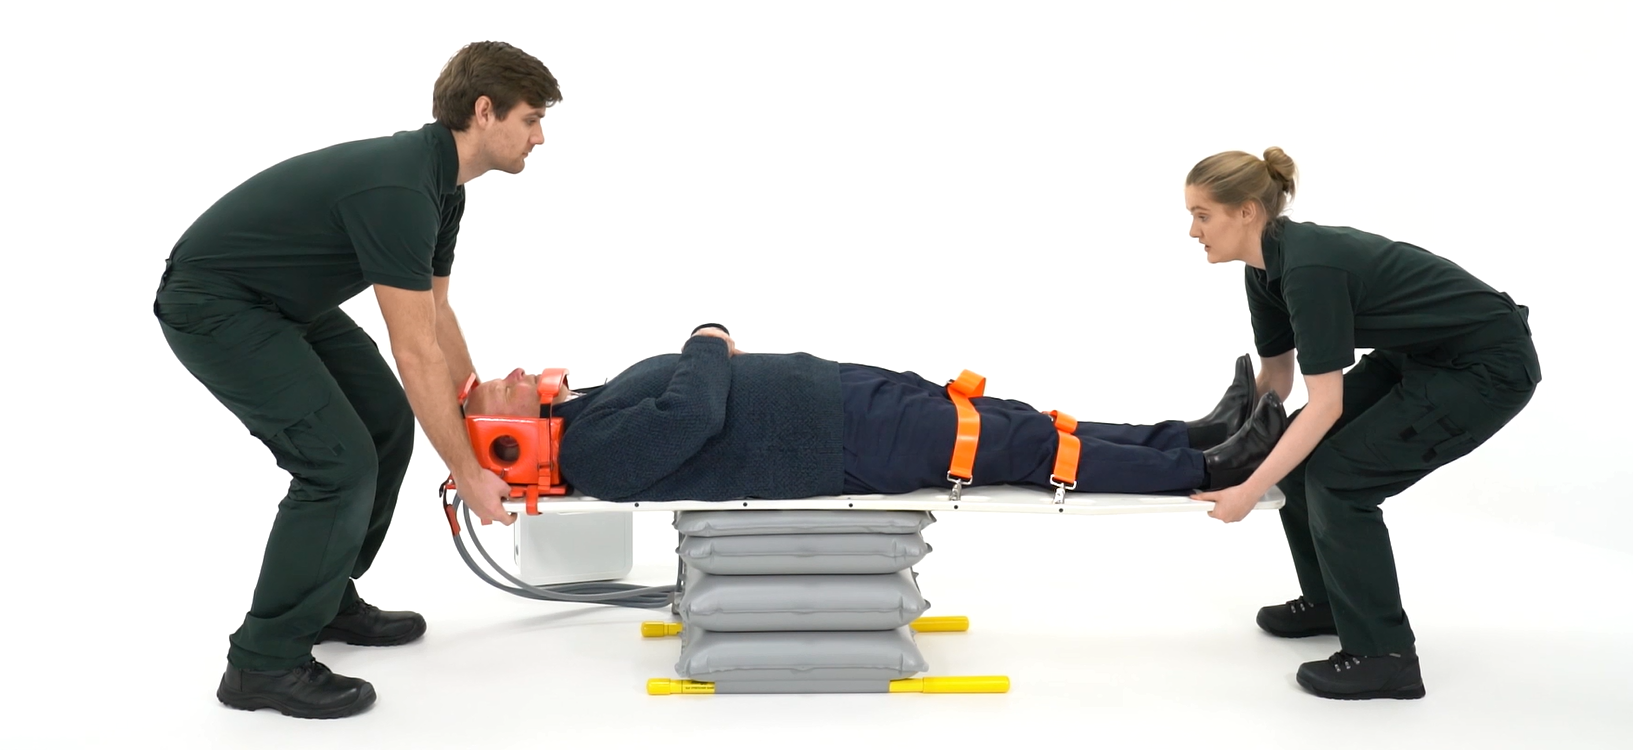 CAMEL Inflatable Patient Lifting Cushion – Accessible Construction